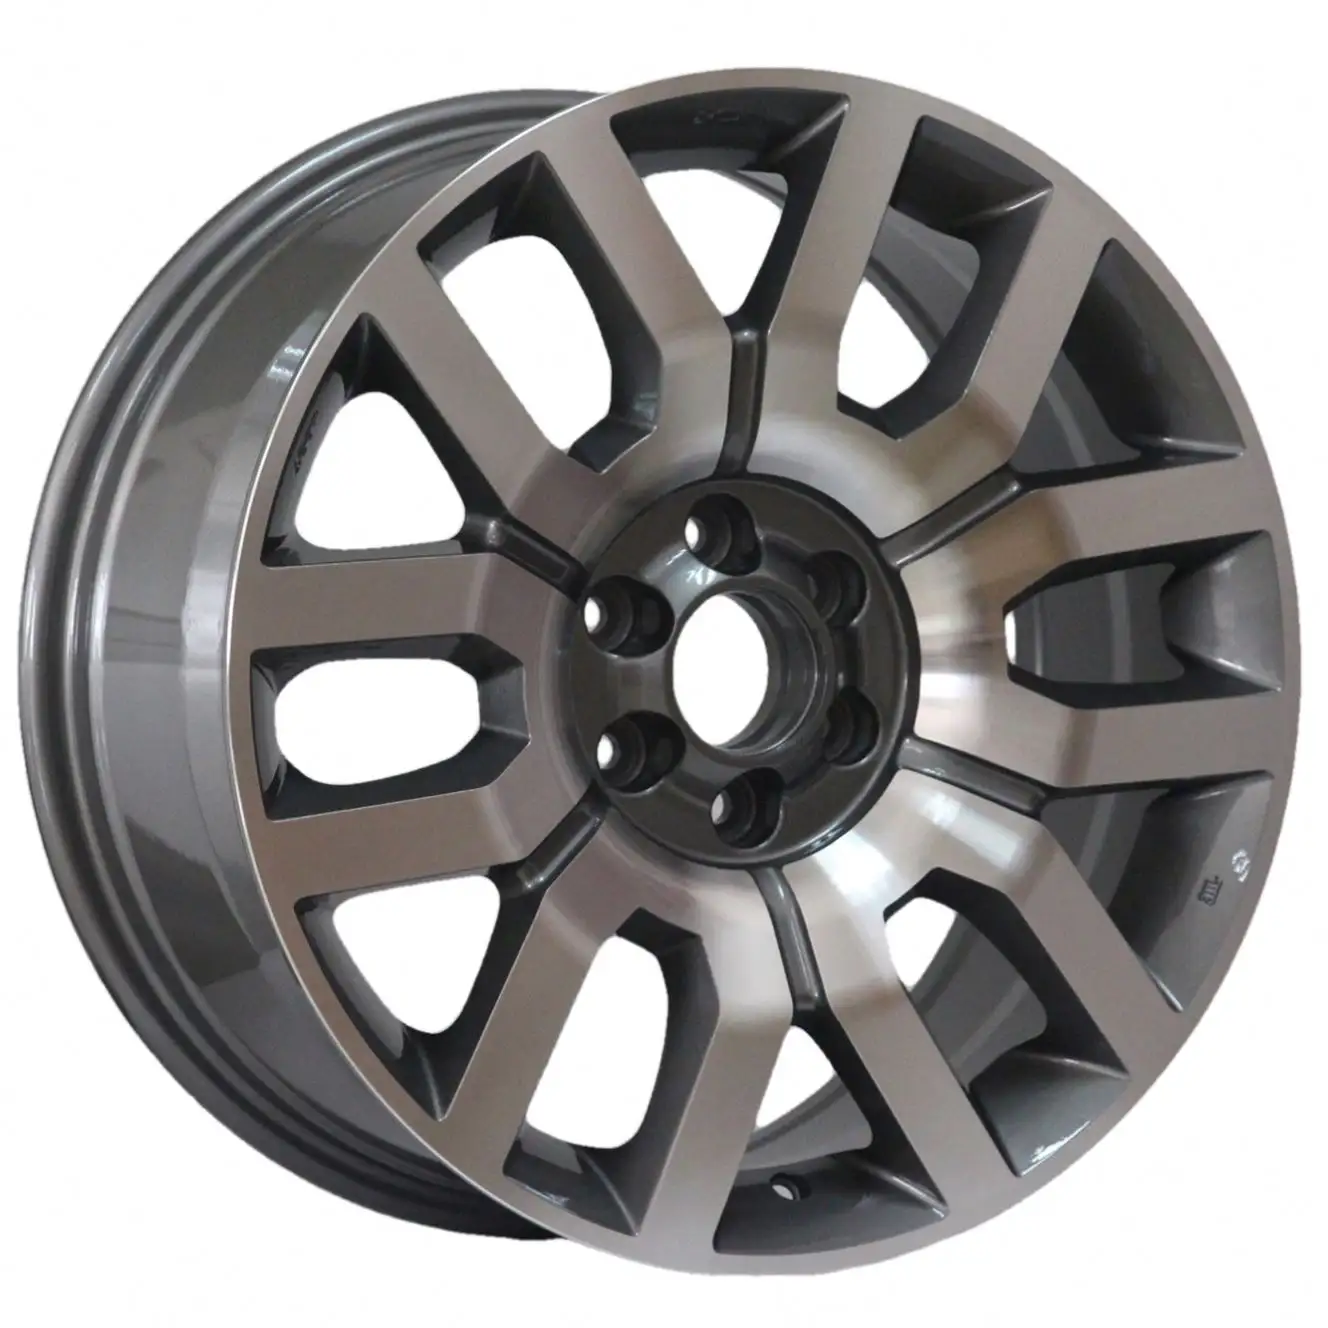 18 Inch For Nissan Alloy Wheel Rims Passenger Car For Weld Racing 6 Lugs 6*114.3 For Nissan Frontier Navara Pathfinder